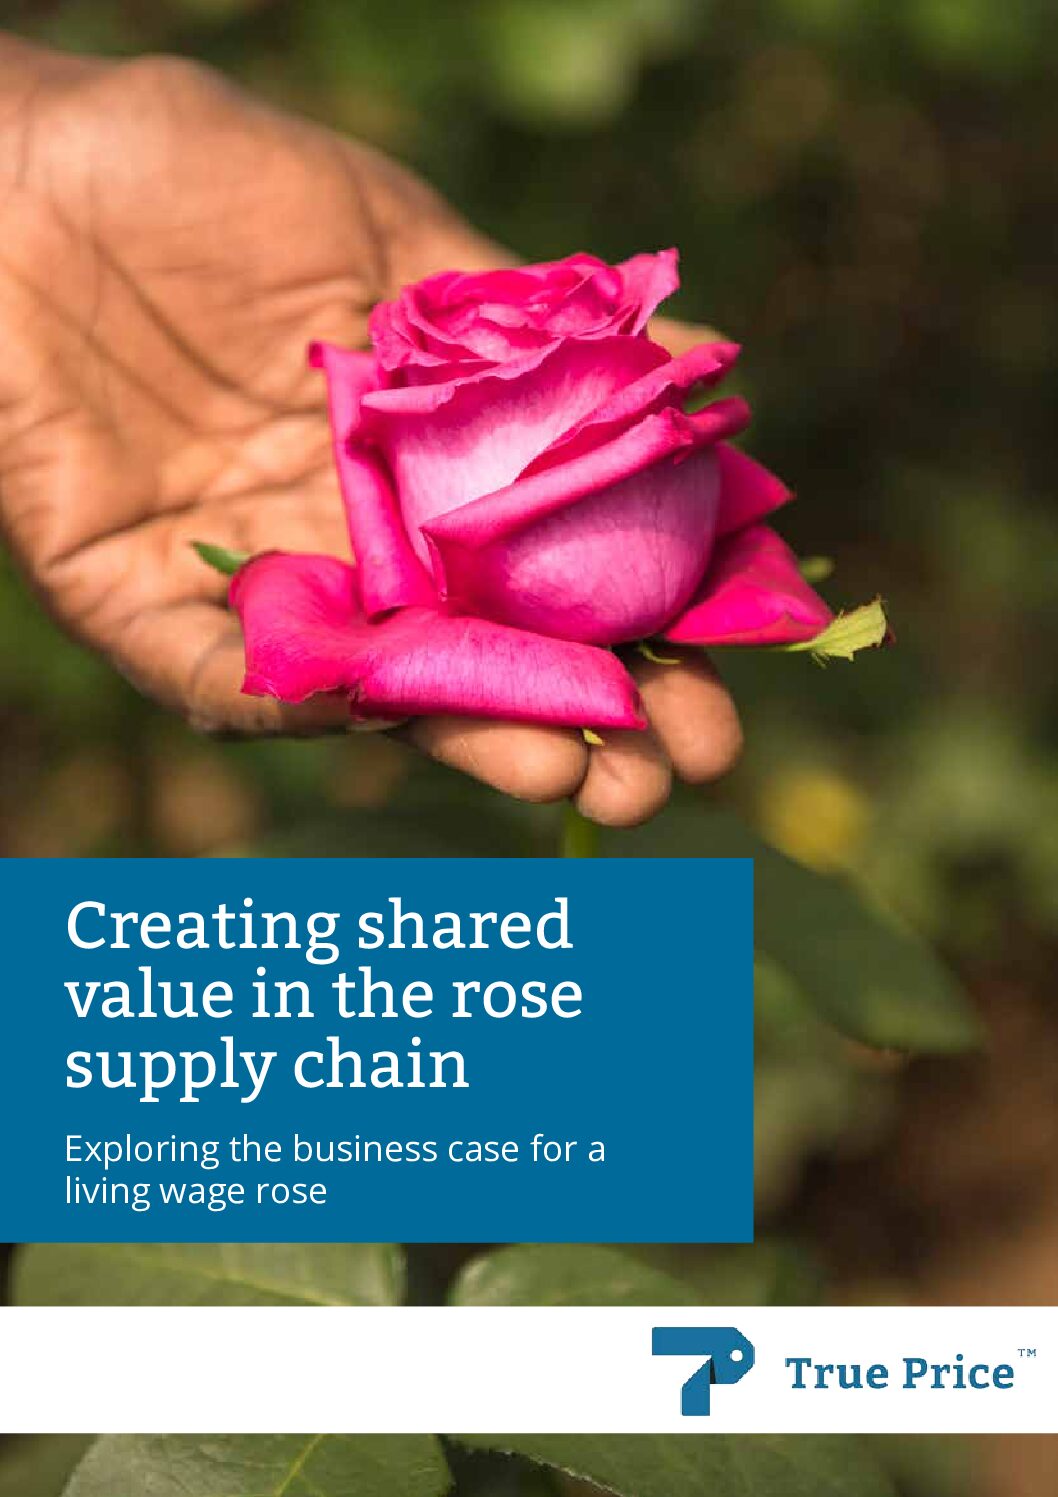 Creating shared value in the rose supply chain